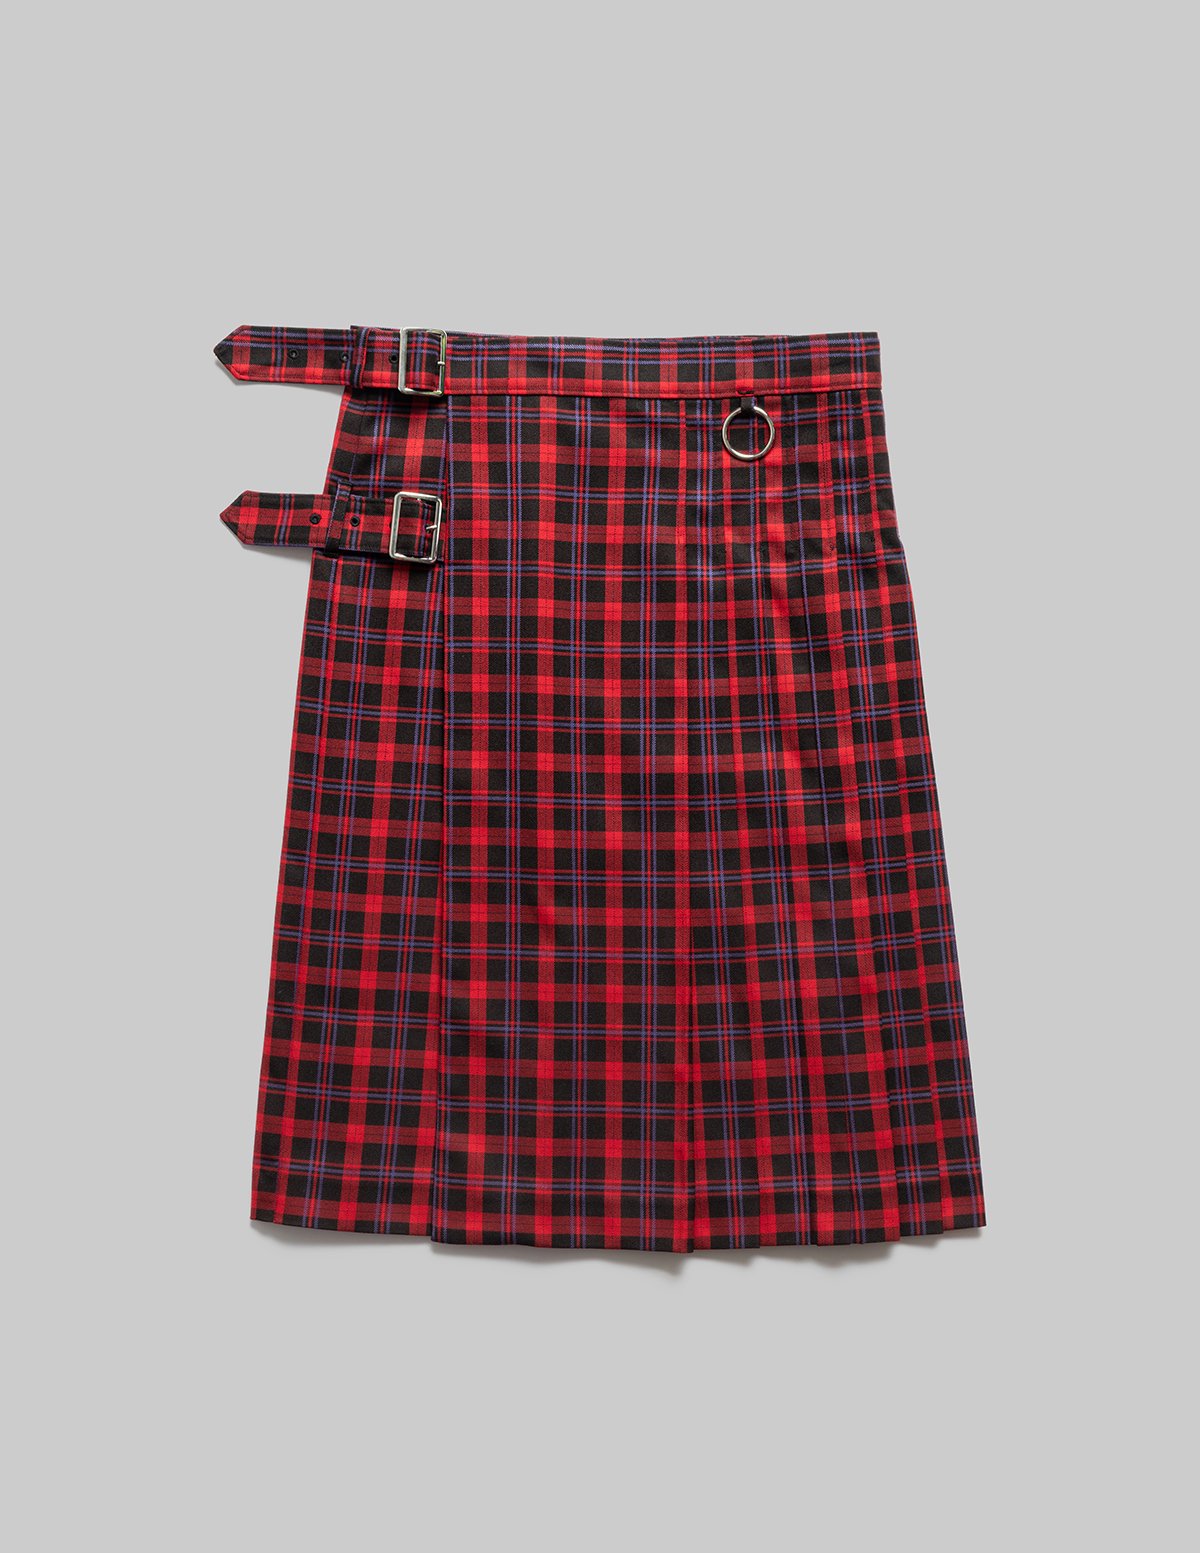 CHECKED SKIRT - RED